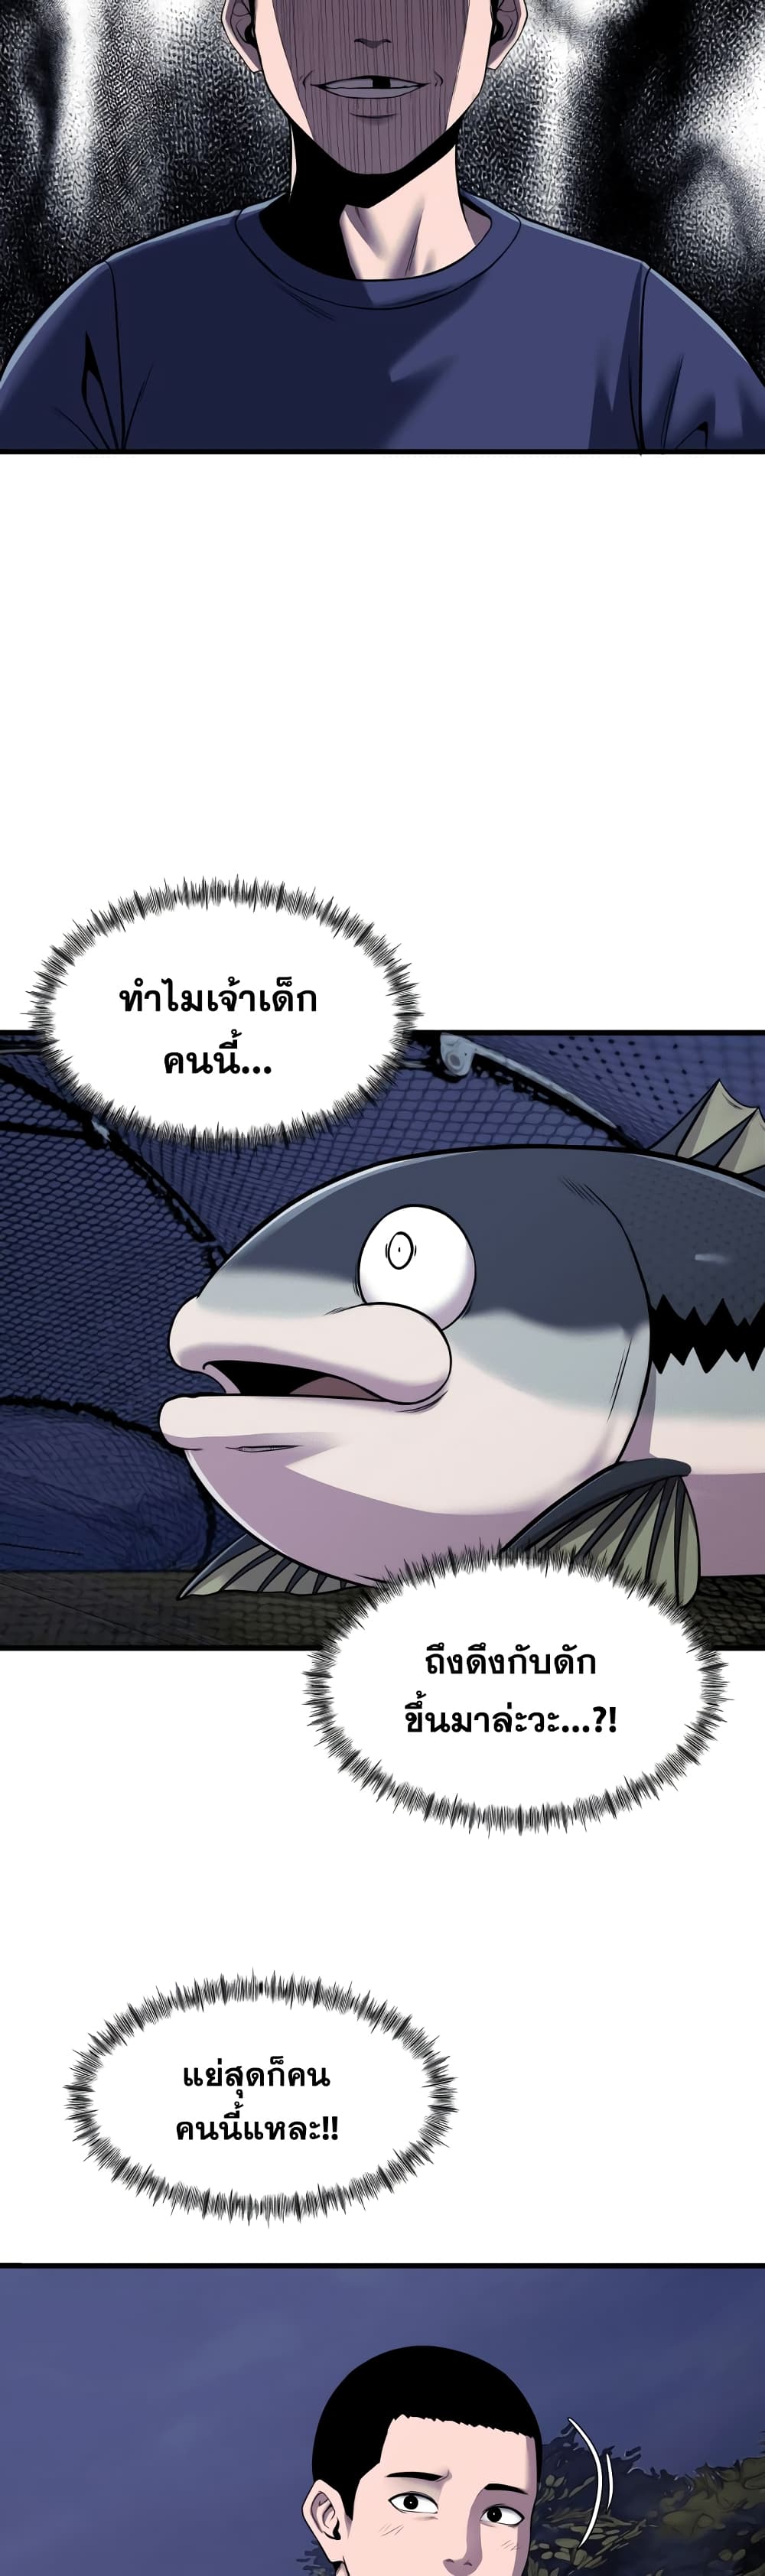 Surviving As a Fish12 (13)